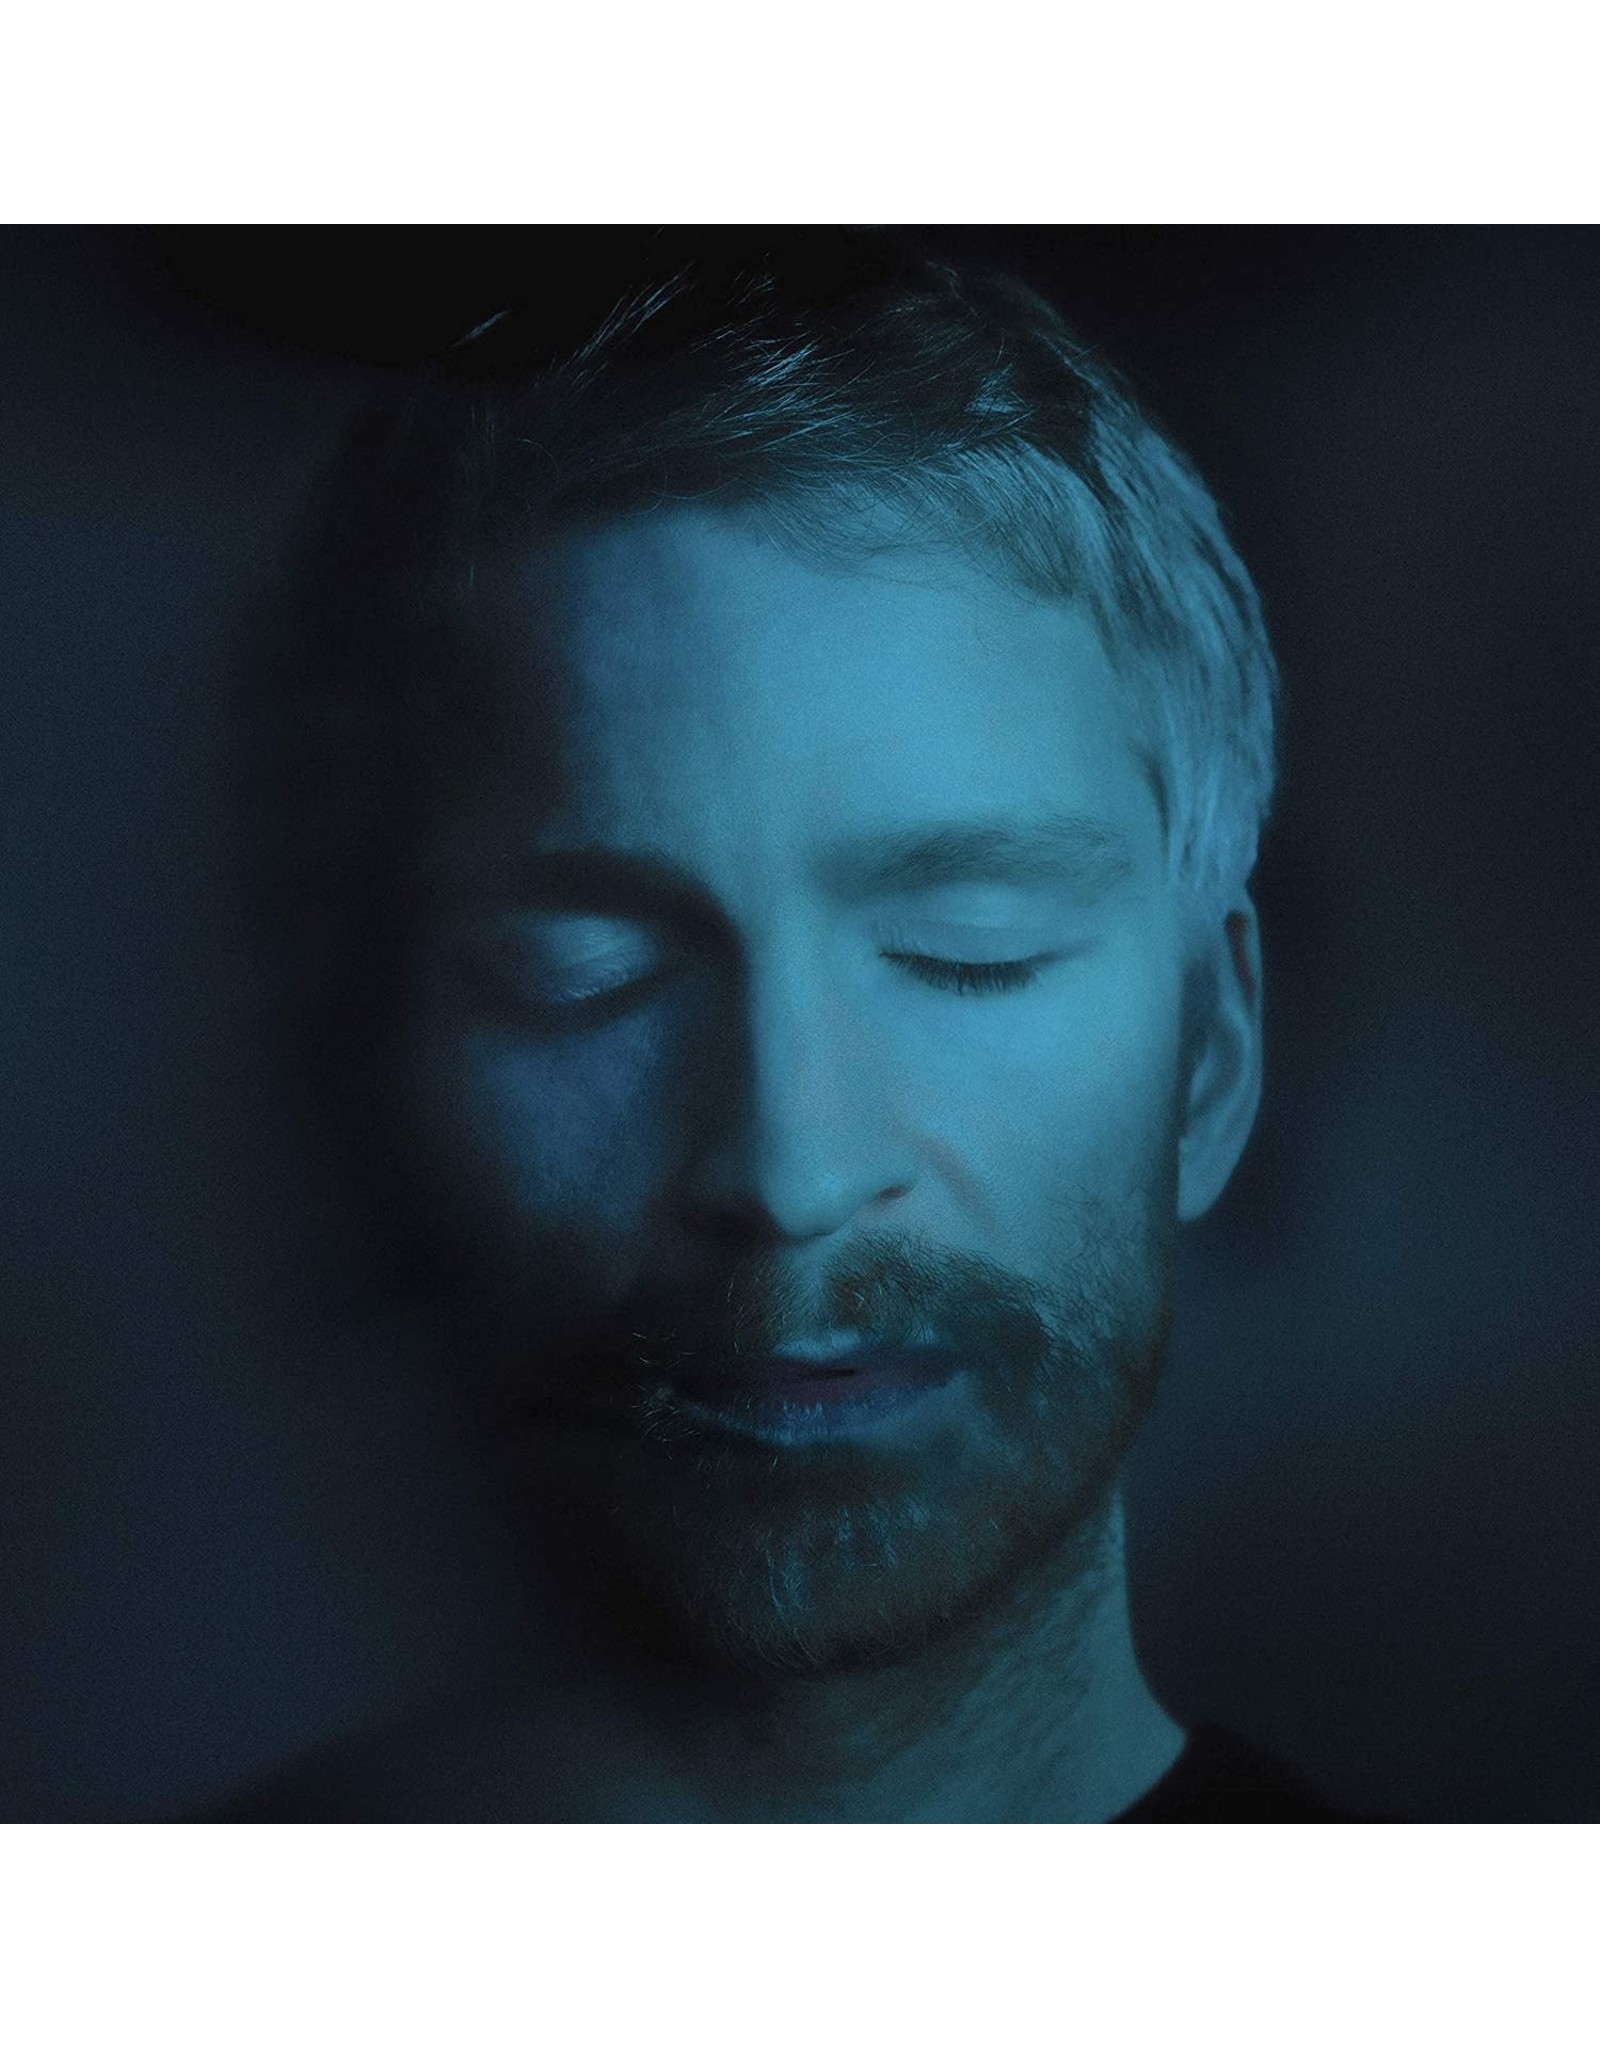 Olafur Arnalds - Some Kind Of Peace